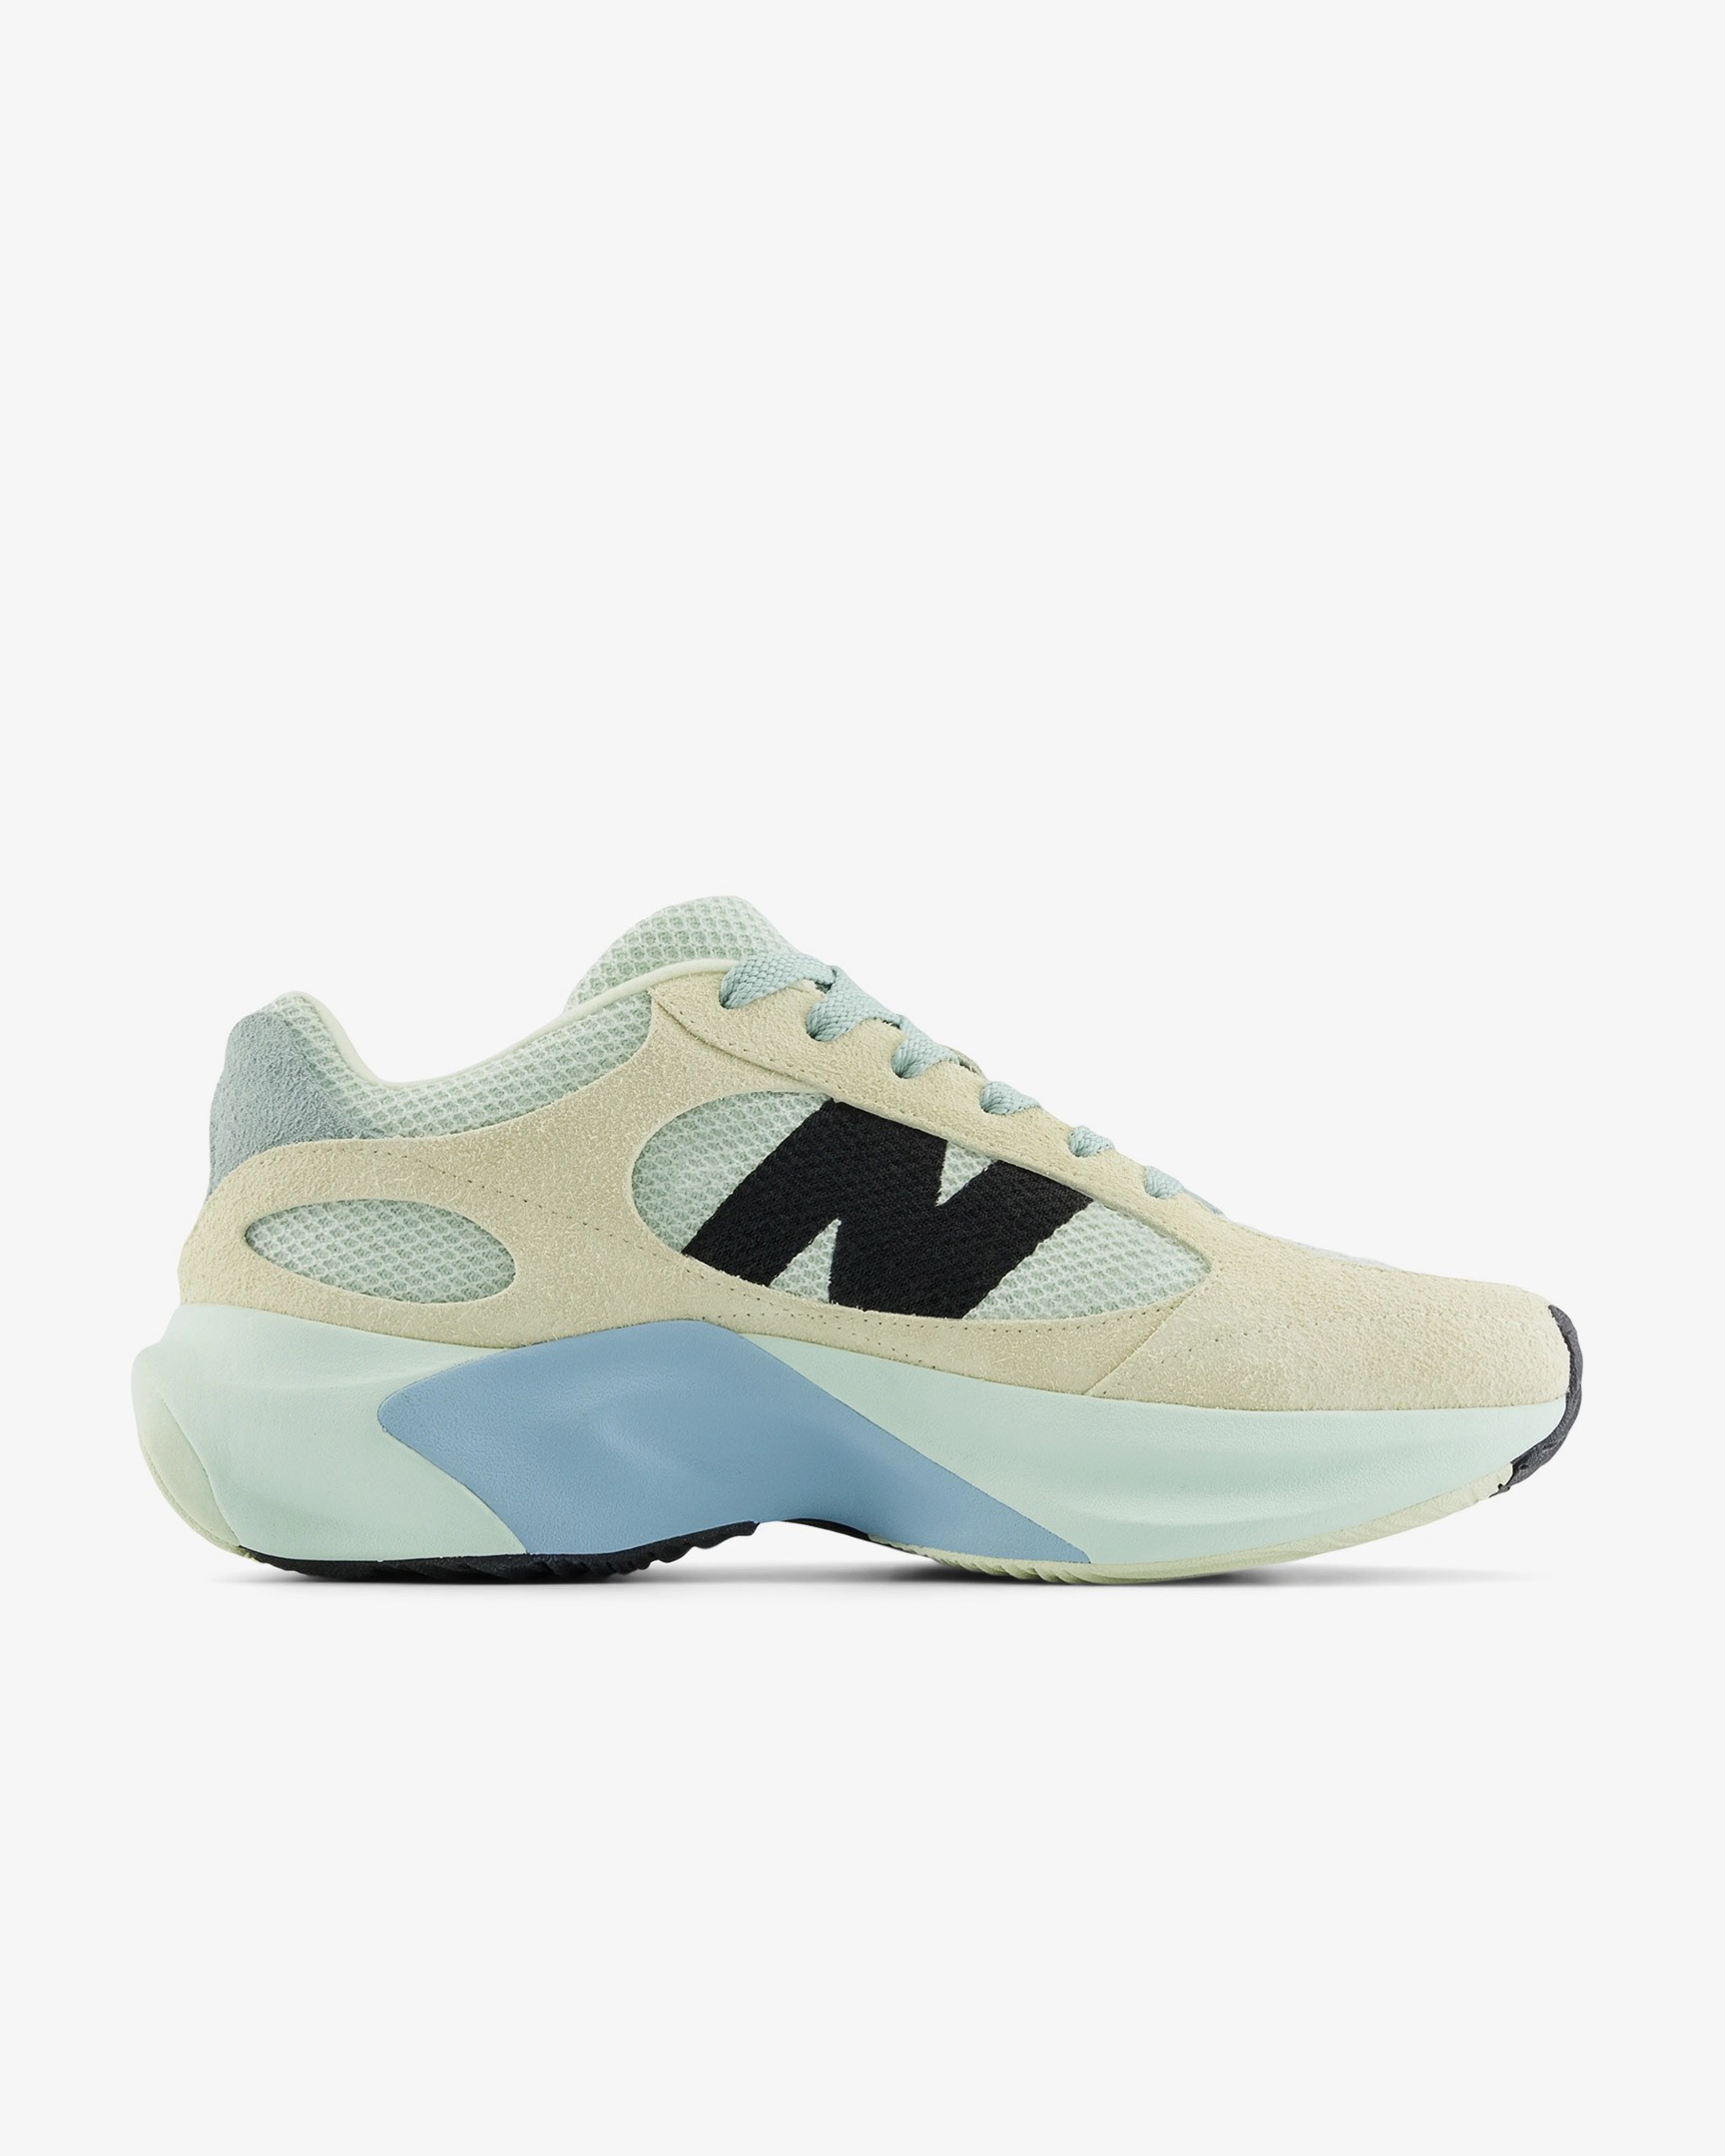 NEW BALANCE WRPD CLAY ASH